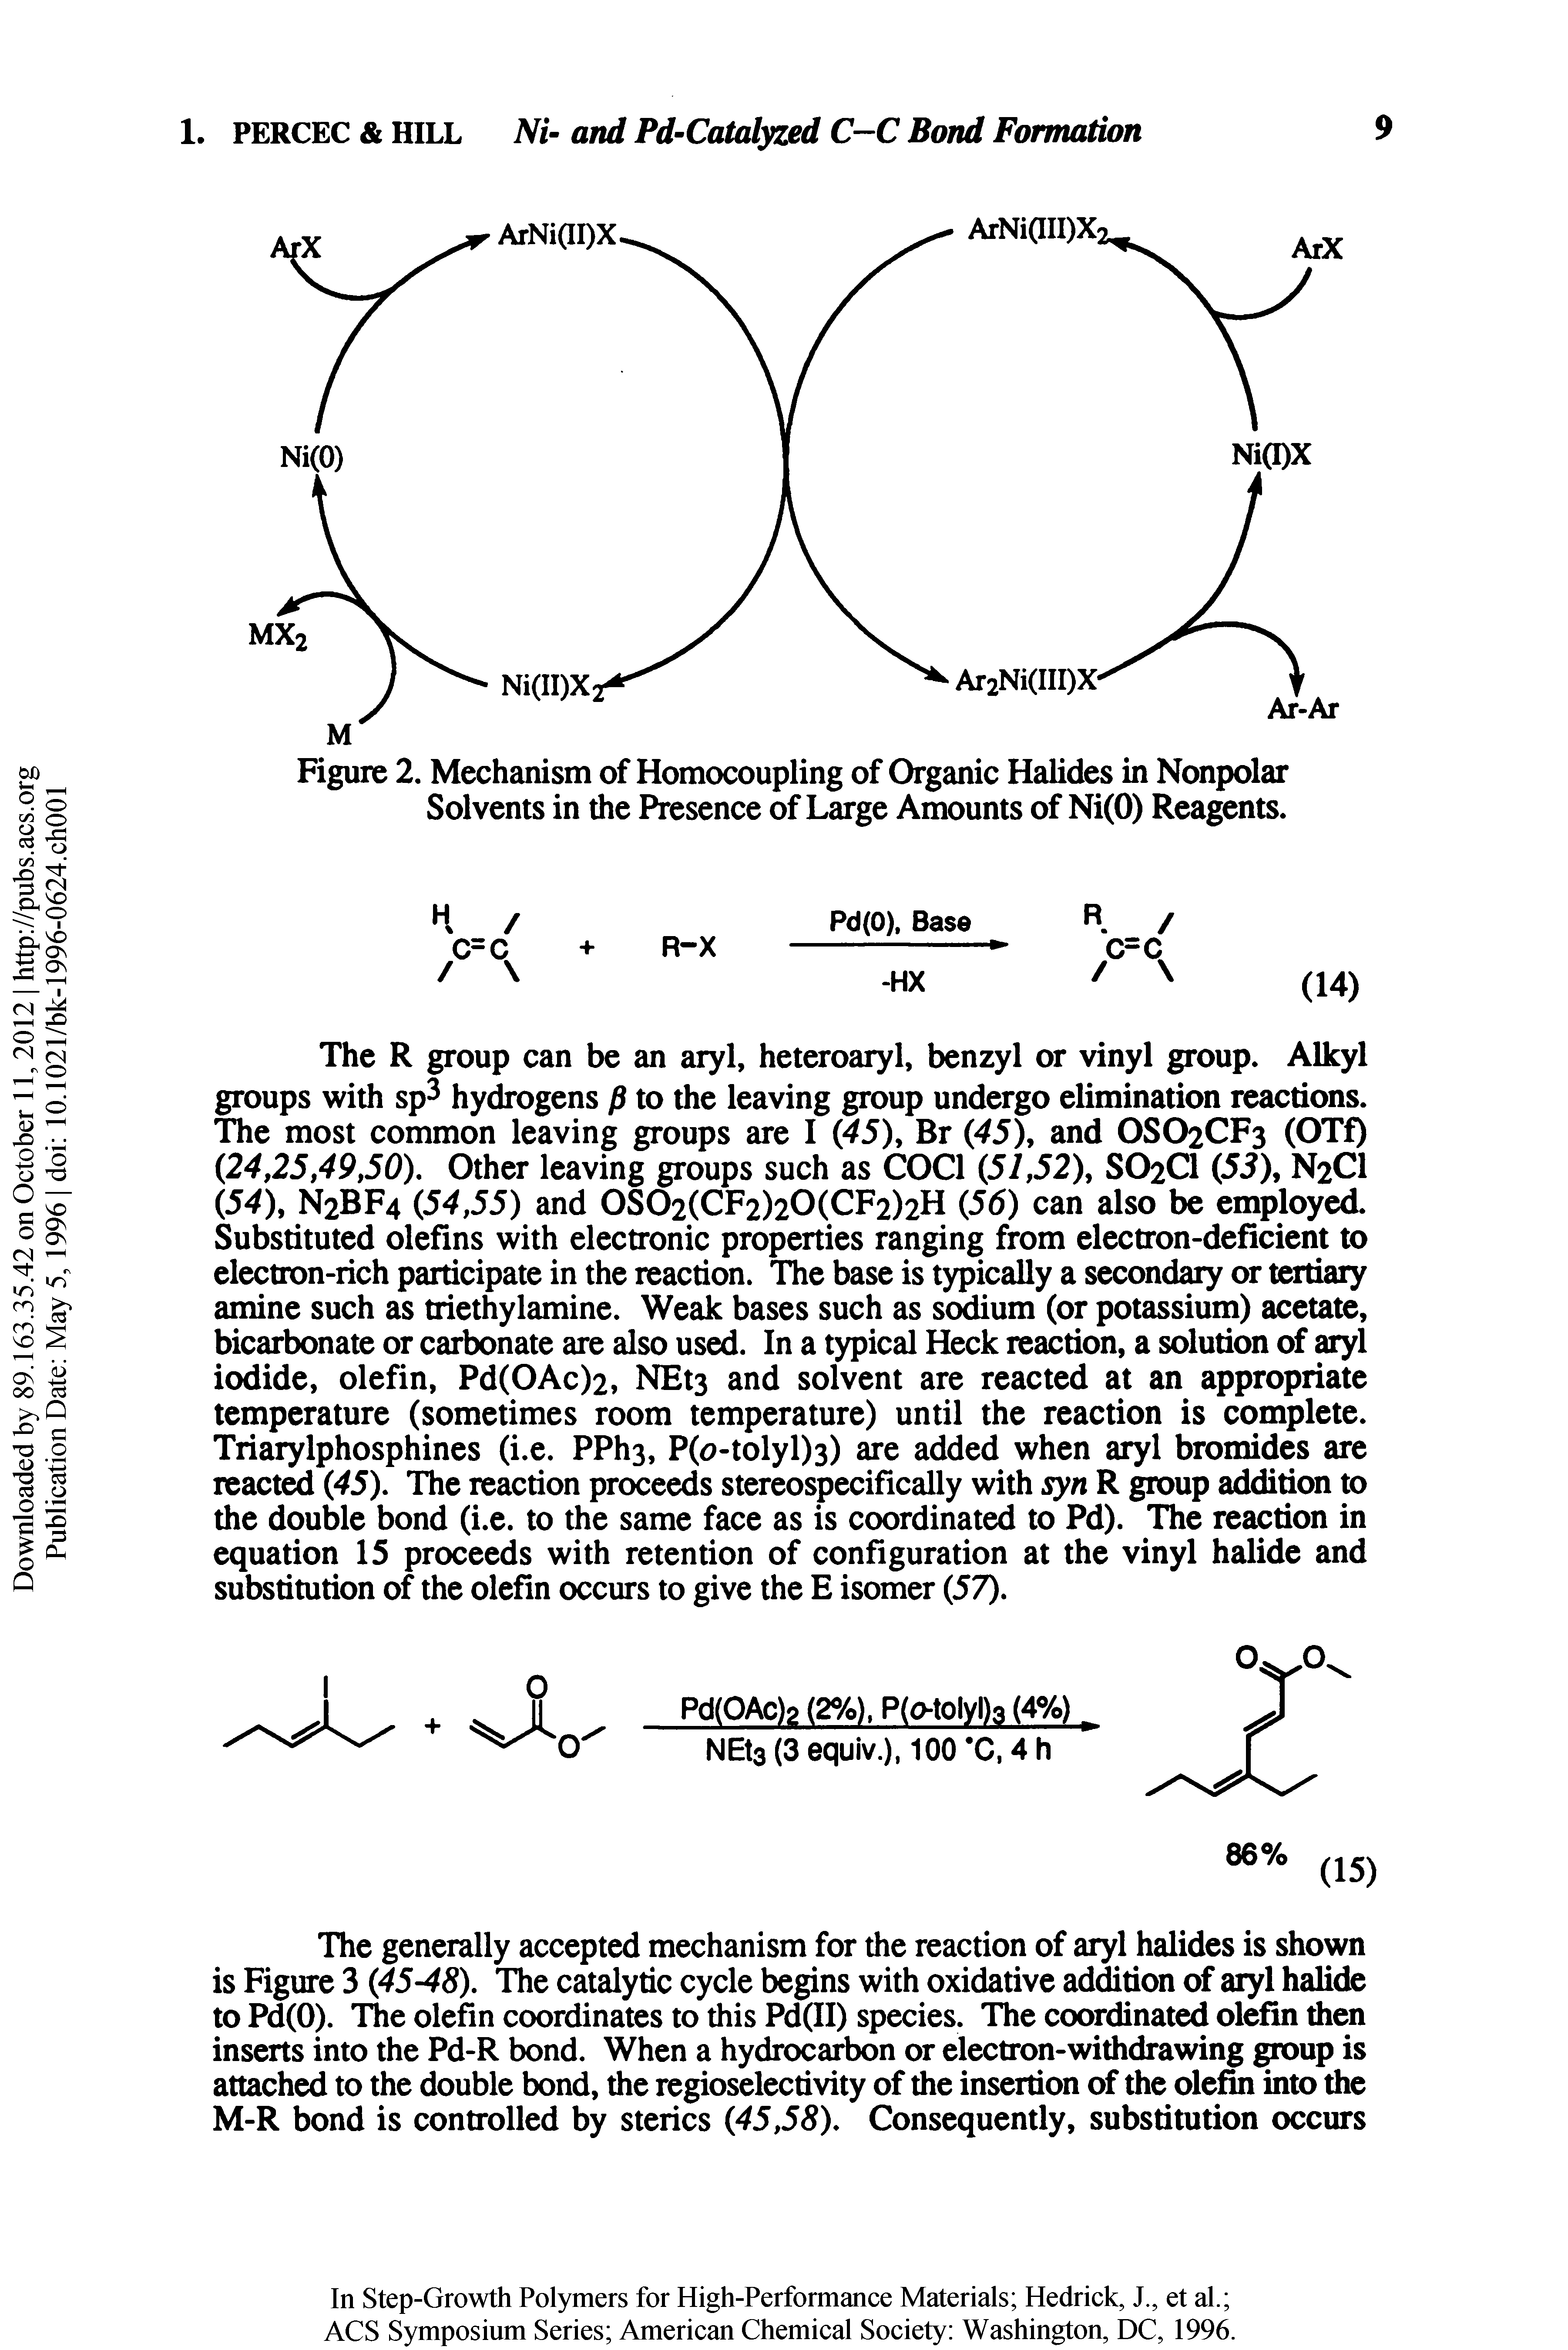 Figure 2. Mechanism of Homocoupling of Organic Halides in Nonpolar Solvents in the Presence of Large Amounts of Ni(0) Reagents.